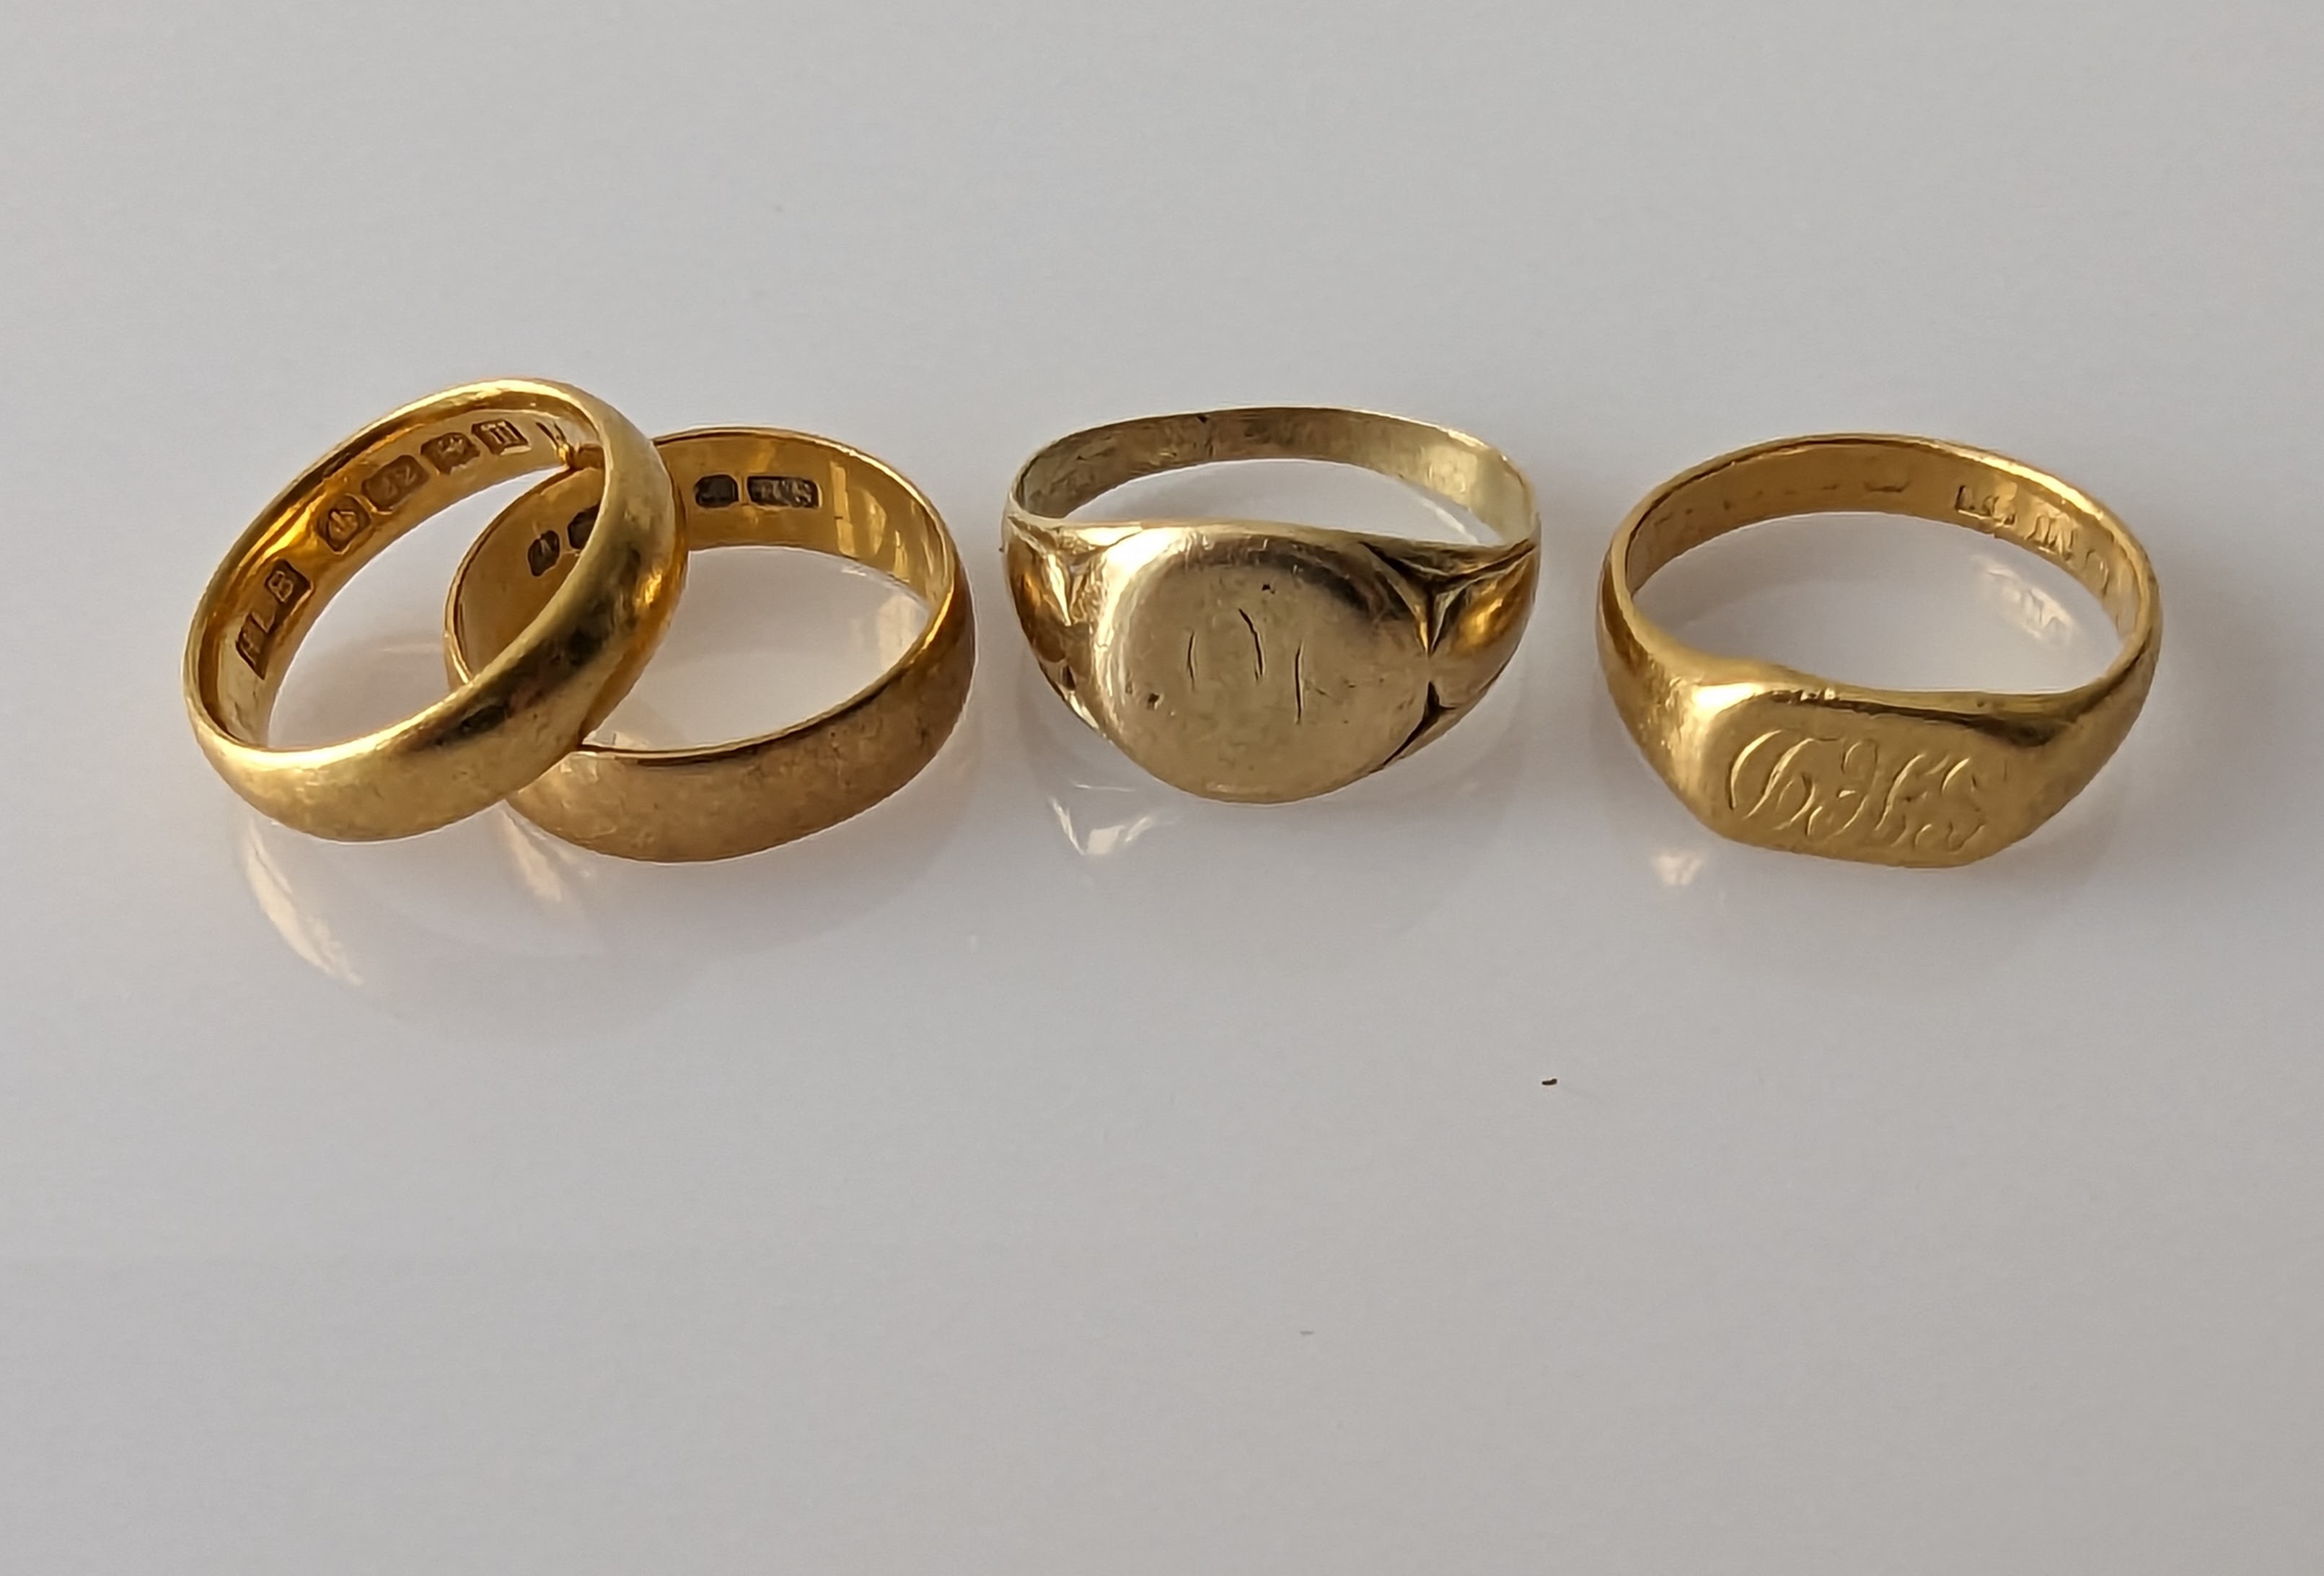 Two 22ct yellow gold wedding bands, both 5mm and two 18ct yellow gold signet rings - Image 2 of 2